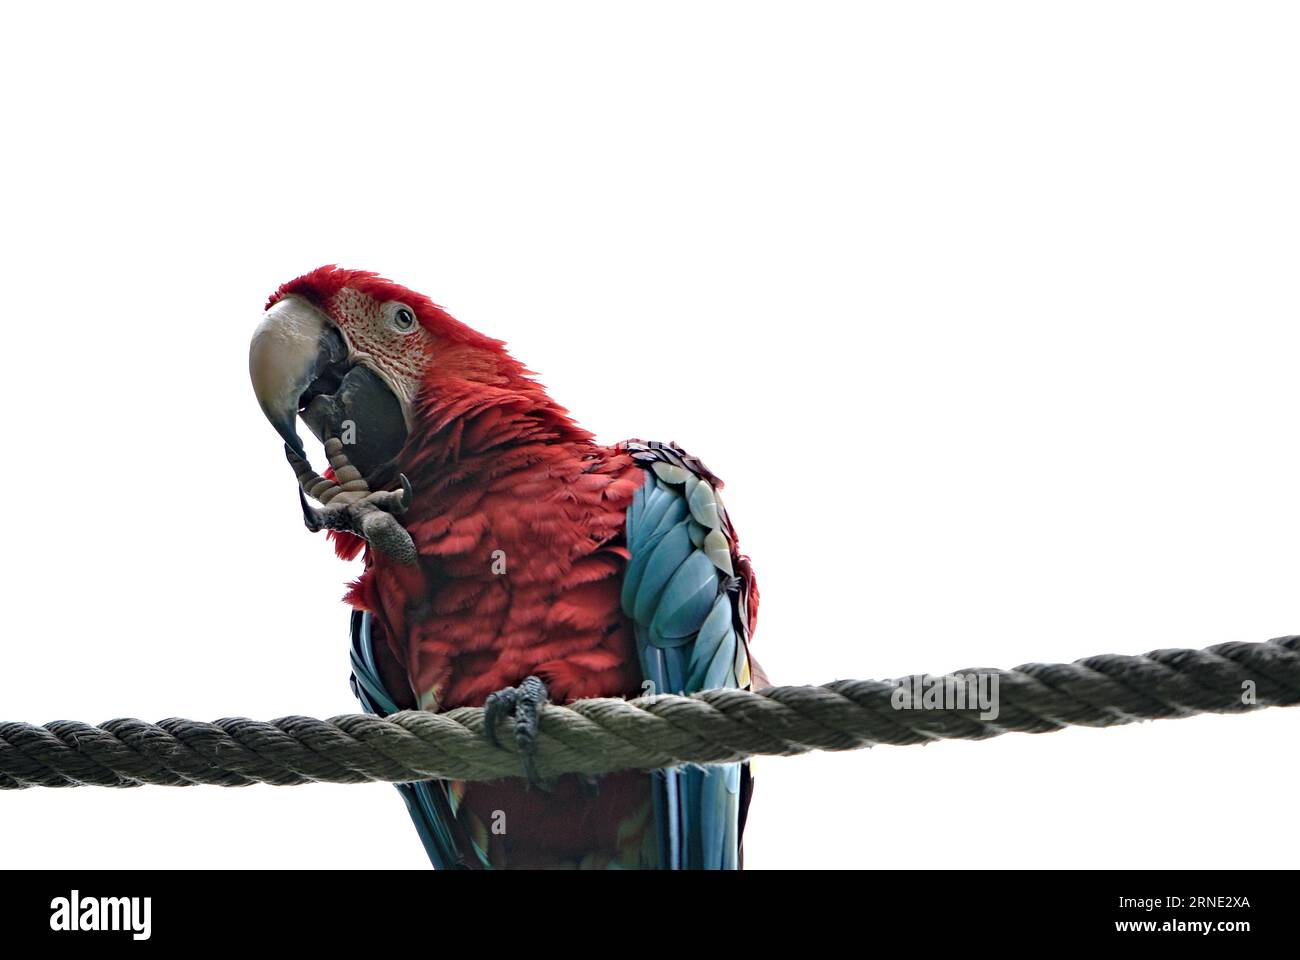 Bird Ara parrot in funny position sitting on the rope in Lesna zoo Zlin, Czech republic. Stock Photo